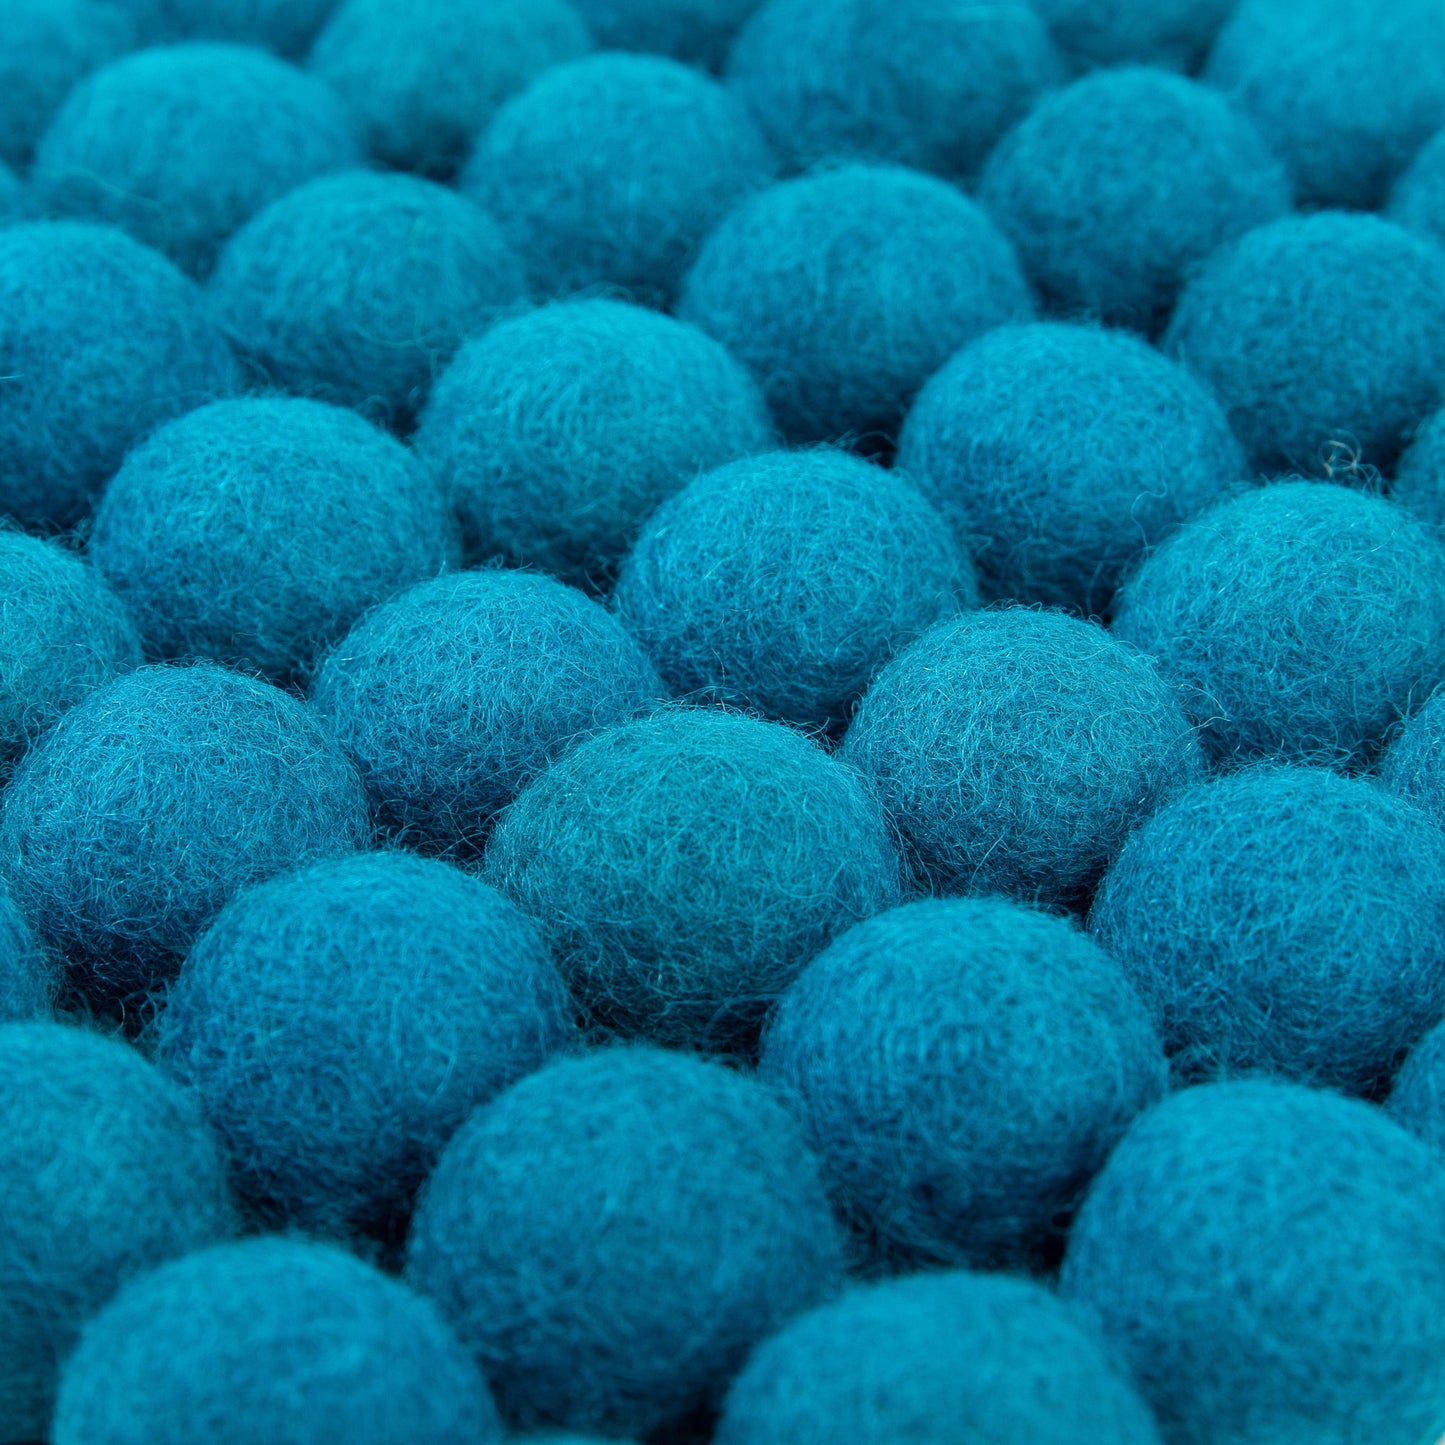 Handmade 2 cm Felt Balls in Assorted Colors for DIY Projects